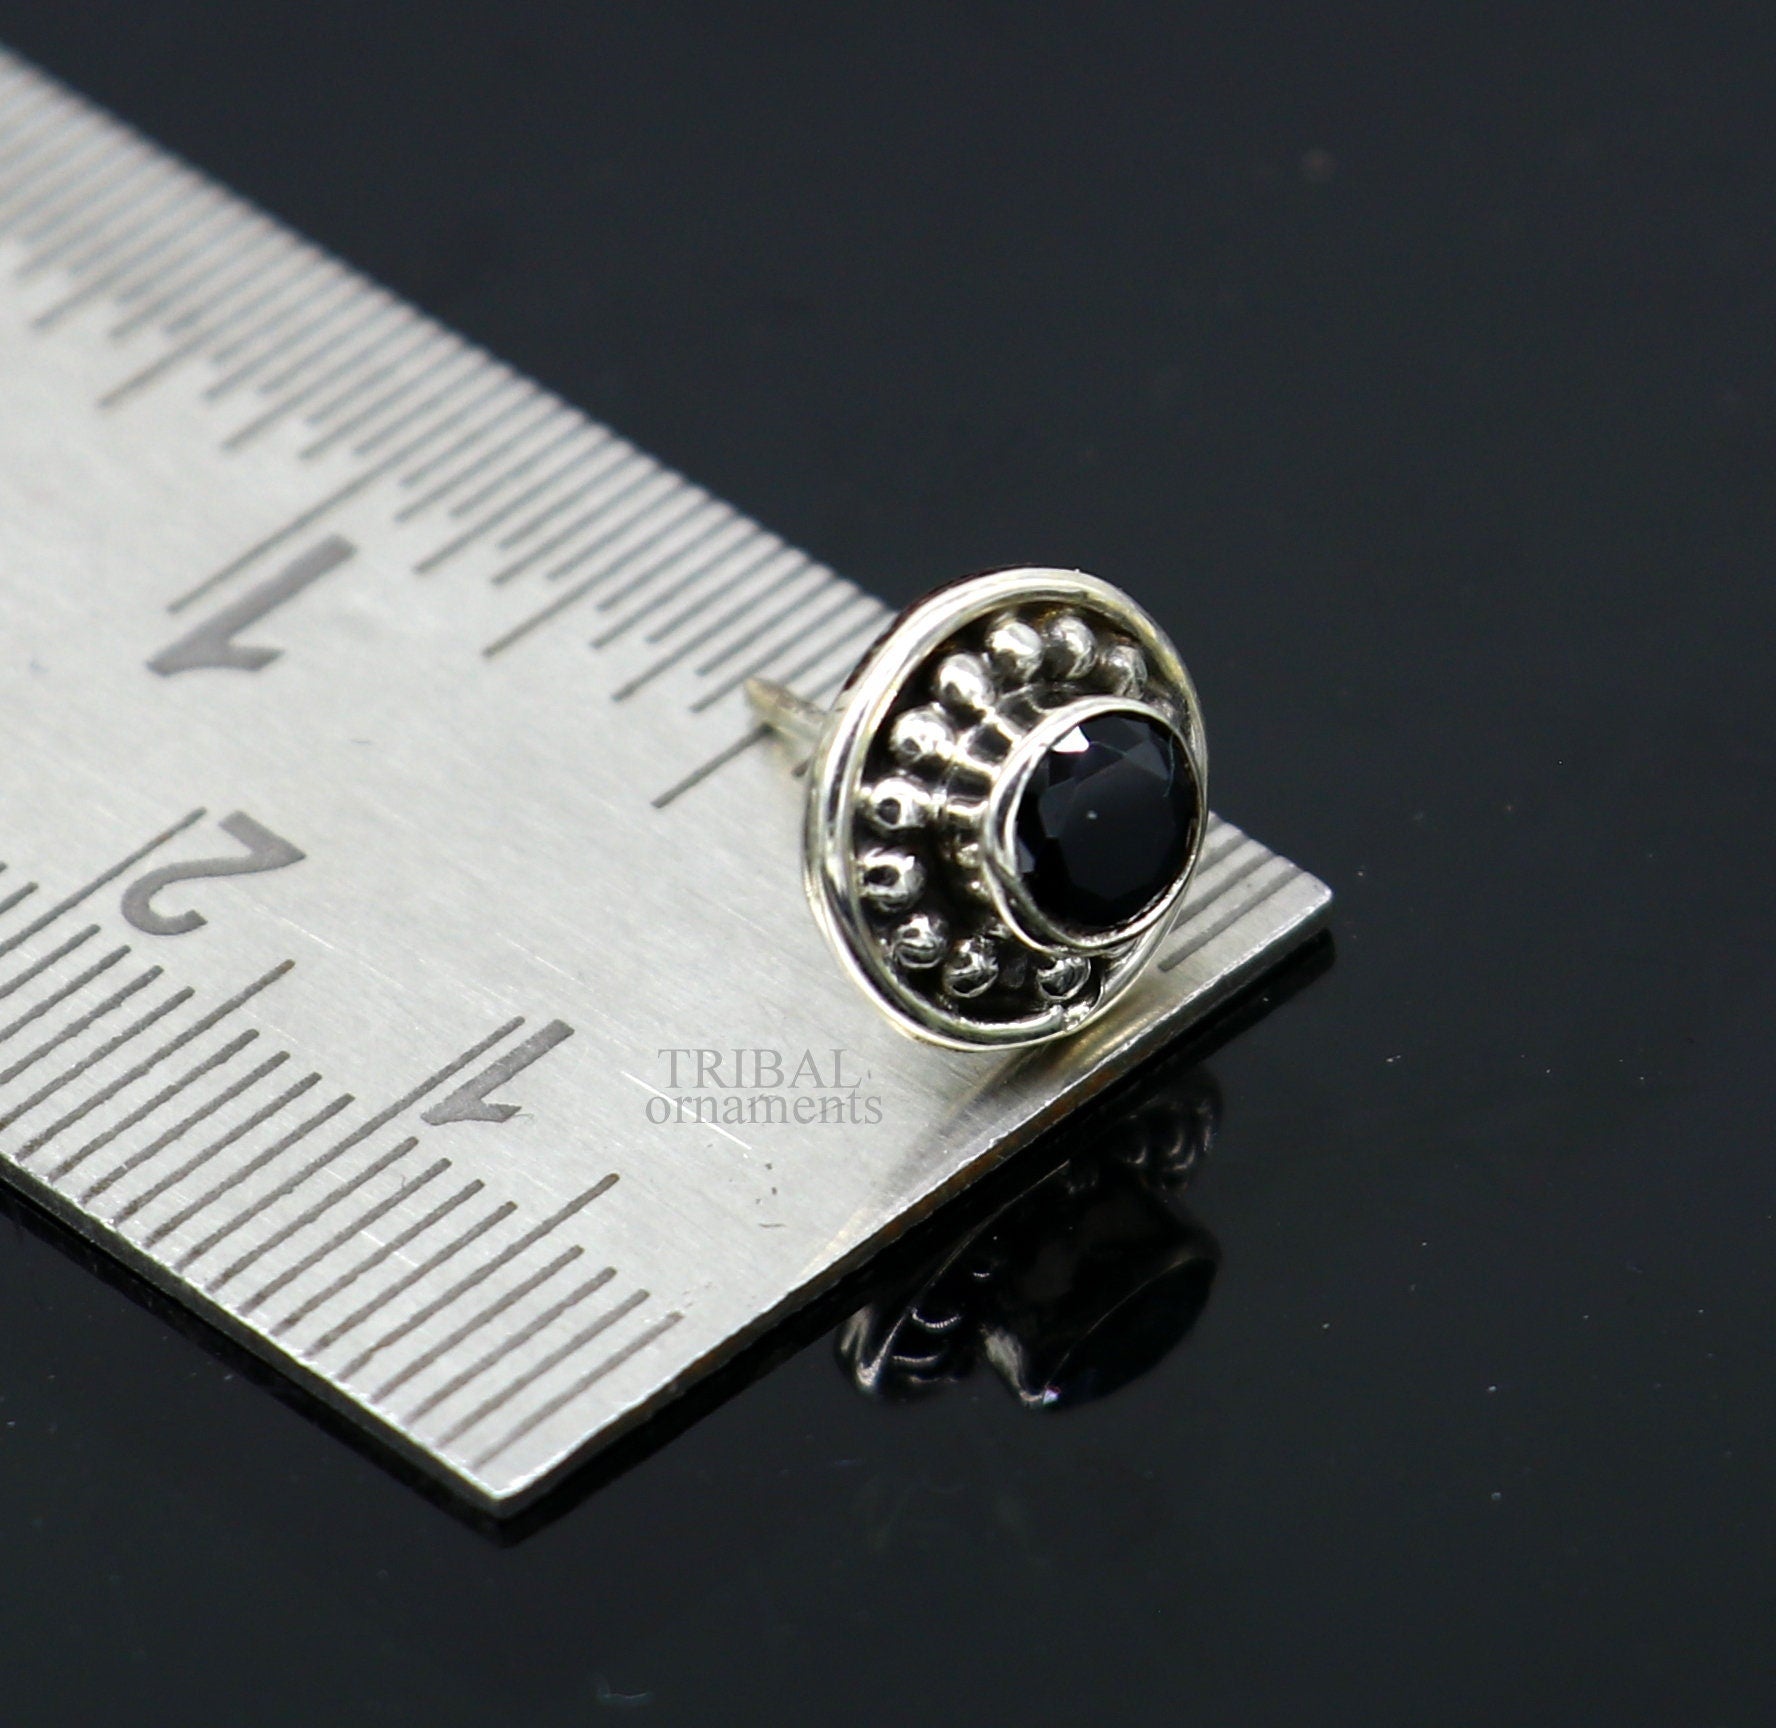 Single Black stone Flower design handmade 925 sterling silver stud earring, best daily use vintage style jewelry from India ear1207 - TRIBAL ORNAMENTS